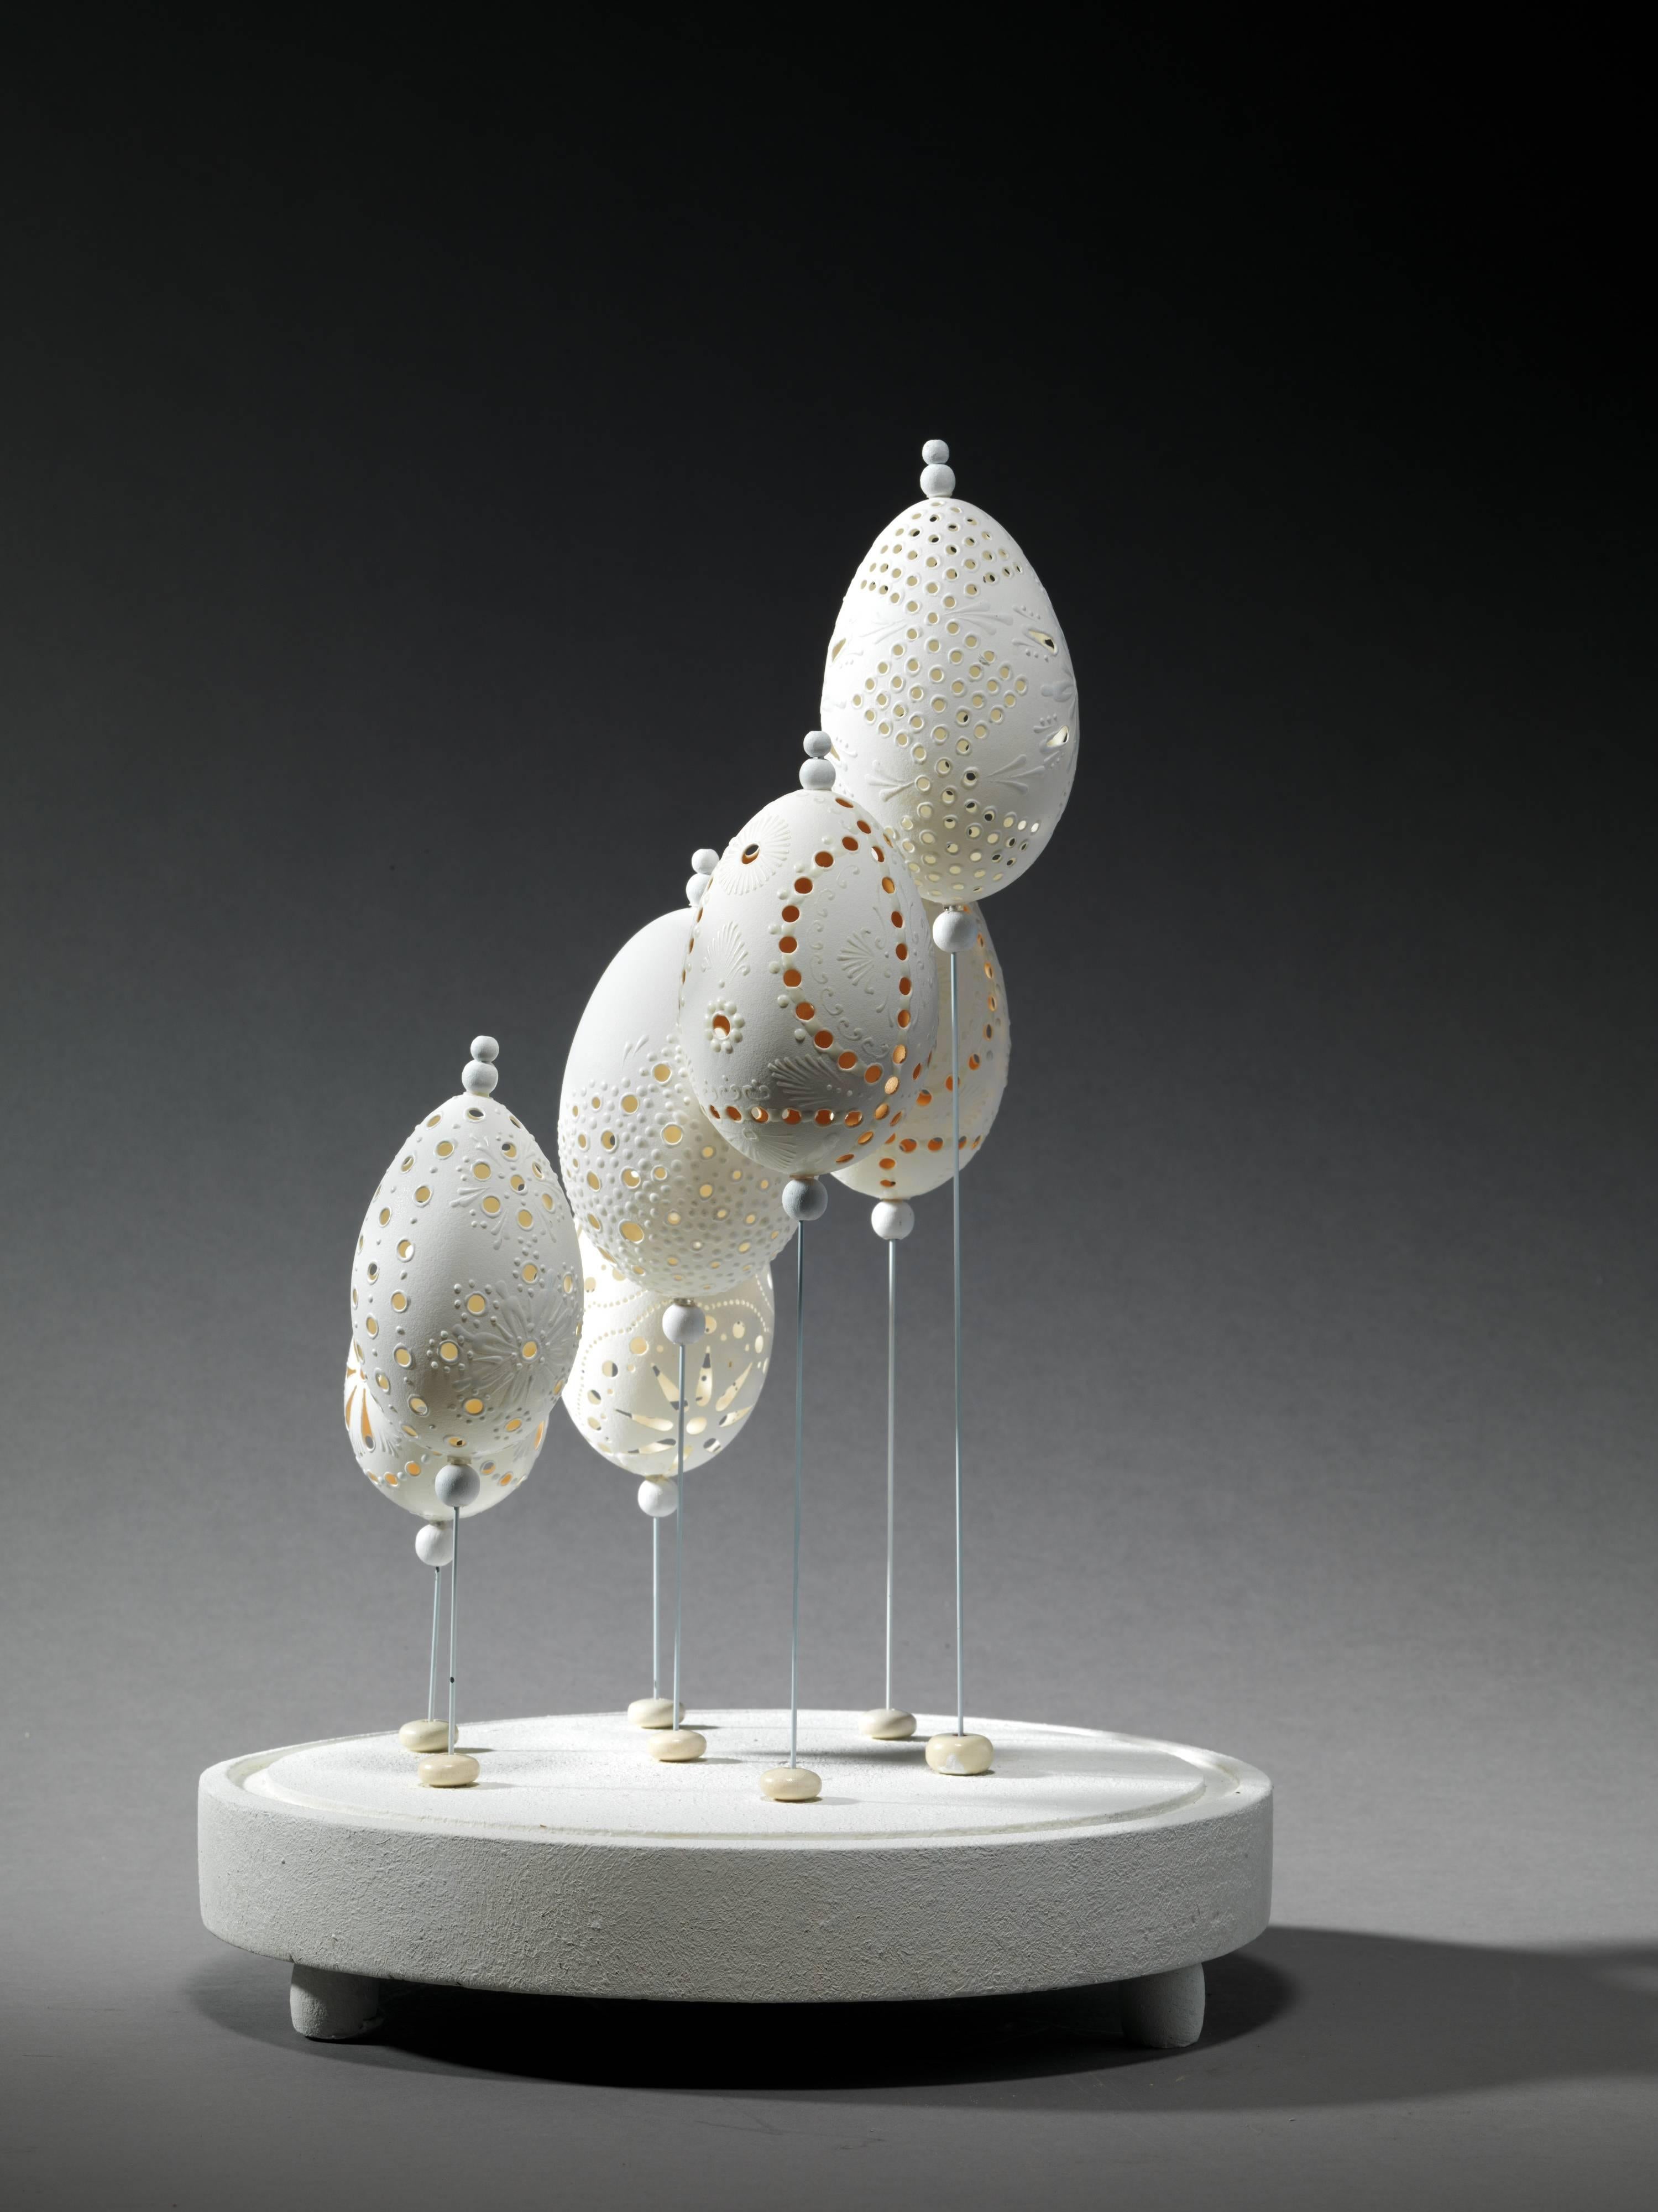 Five Goose eggs decorated with different design incisions.